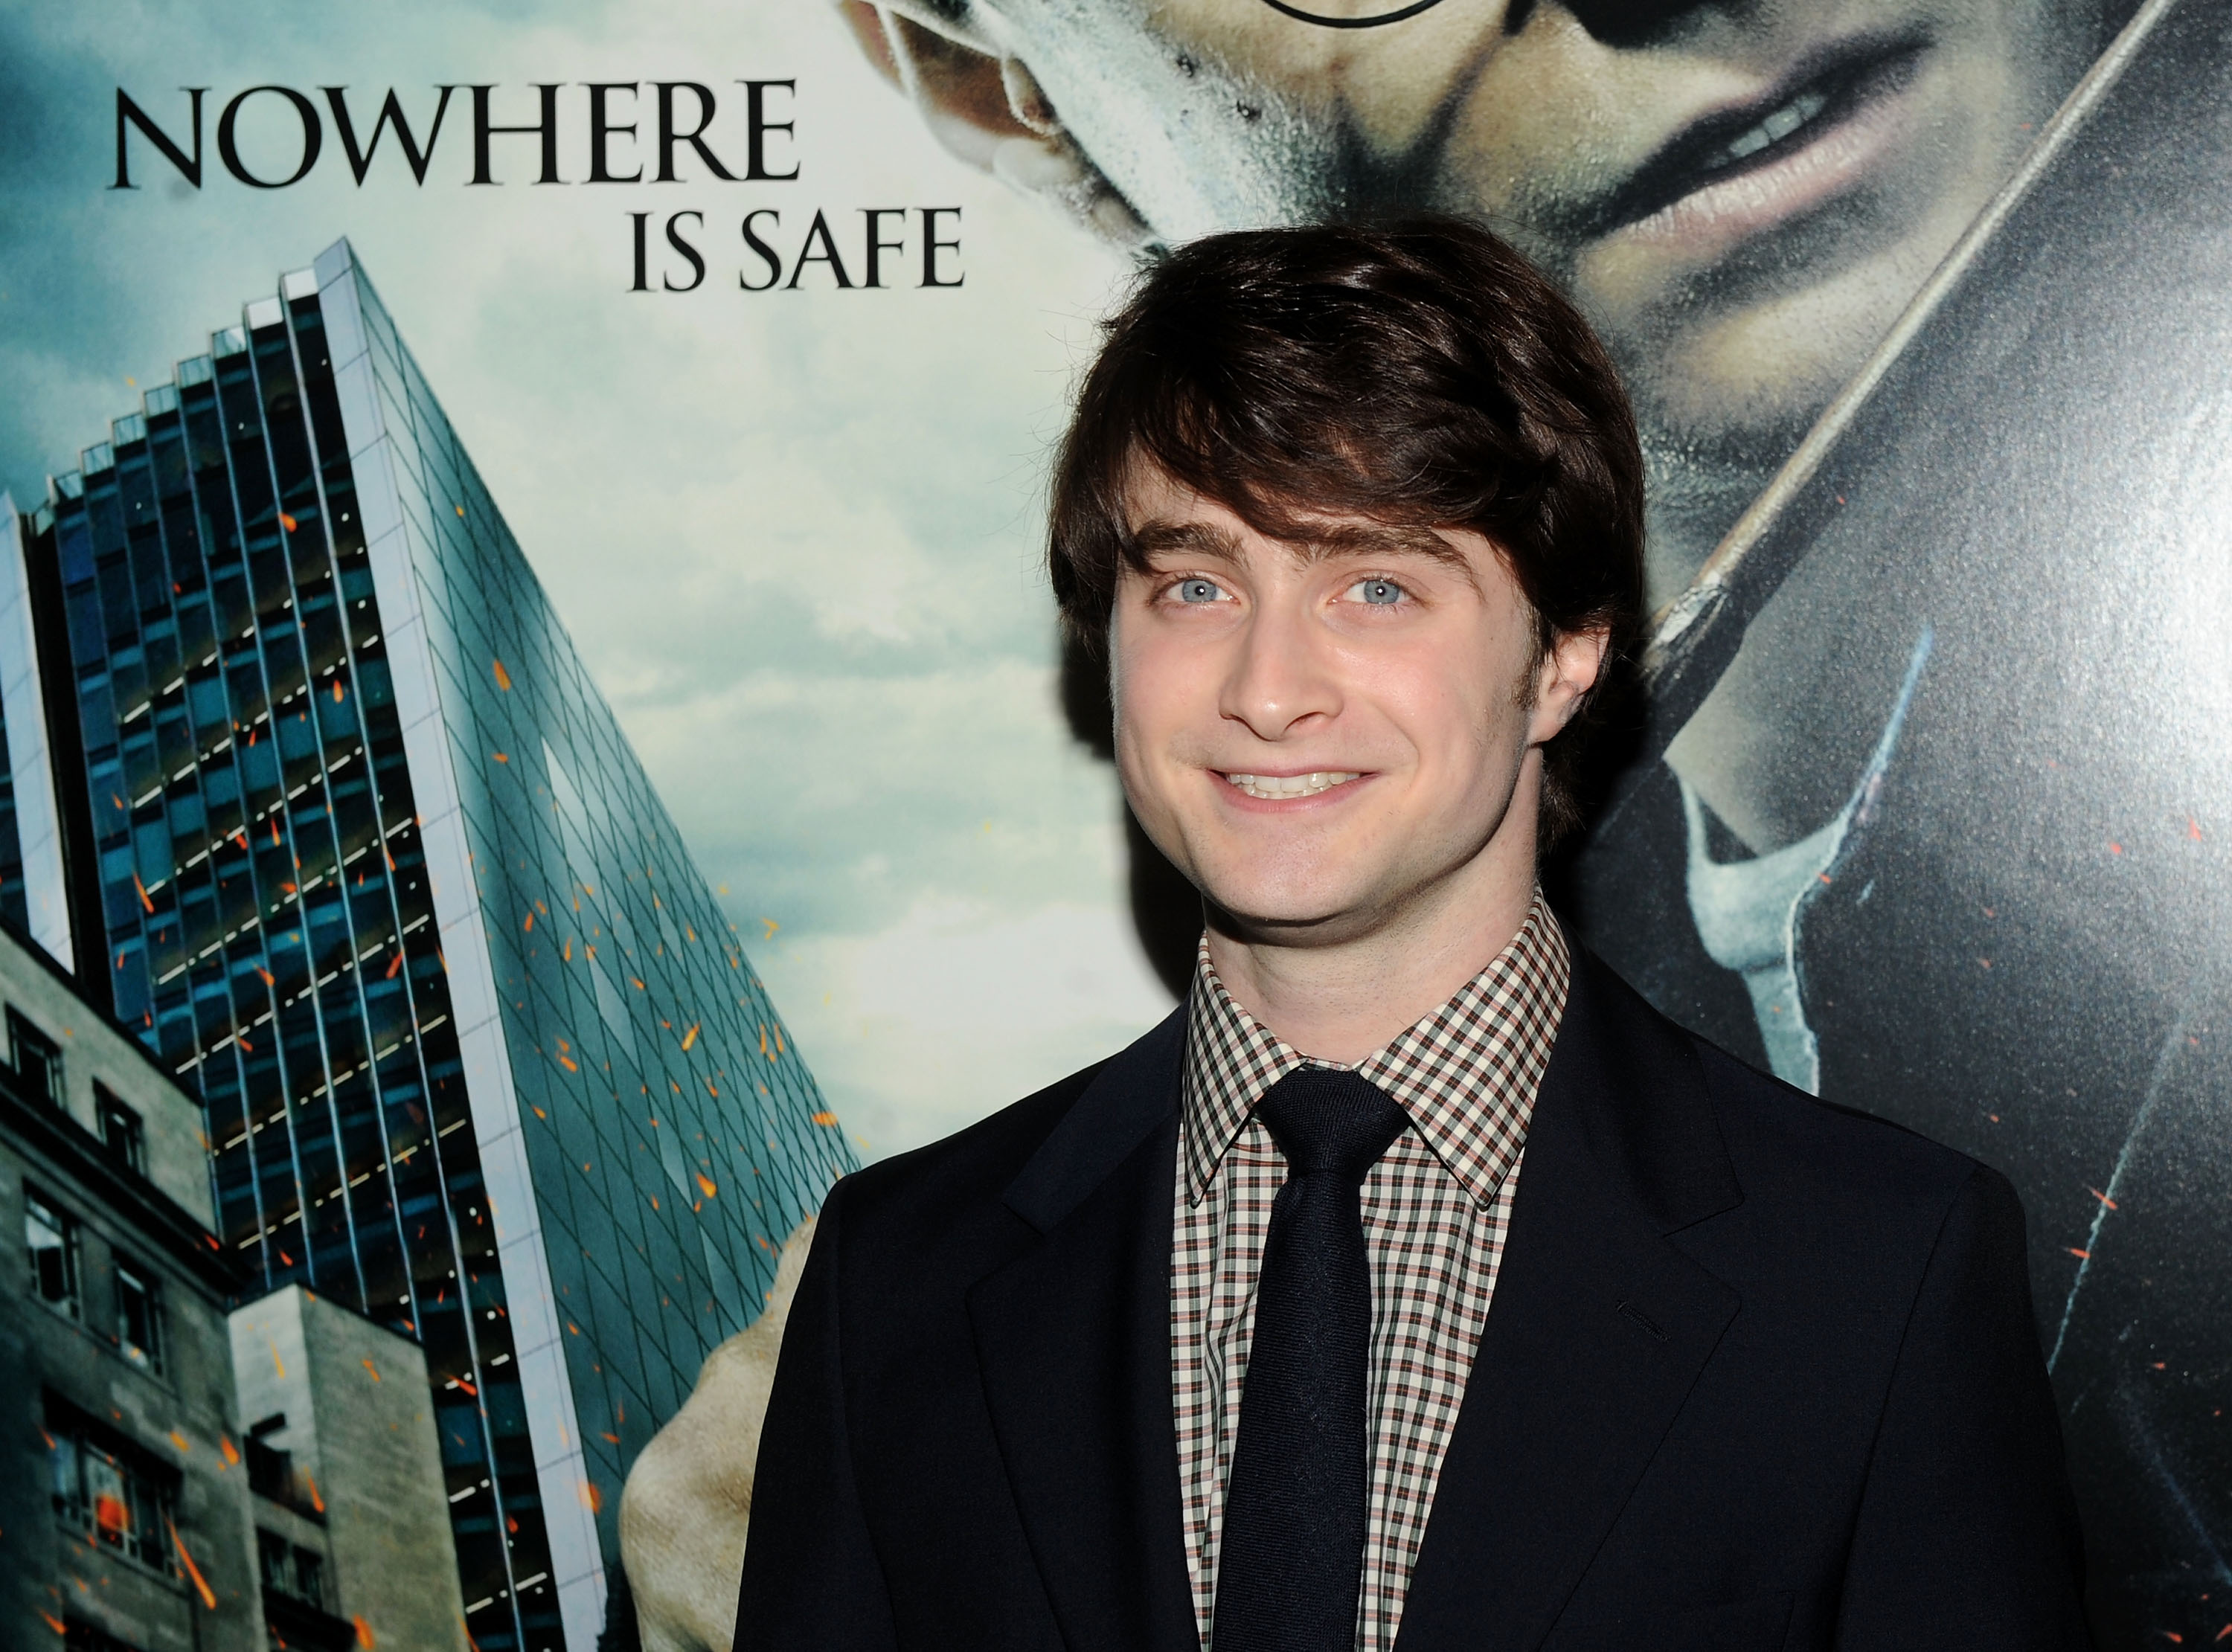 Daniel Radcliffe "Harry Potter And The Deathly Hallows: Part 1" New York Premiere 